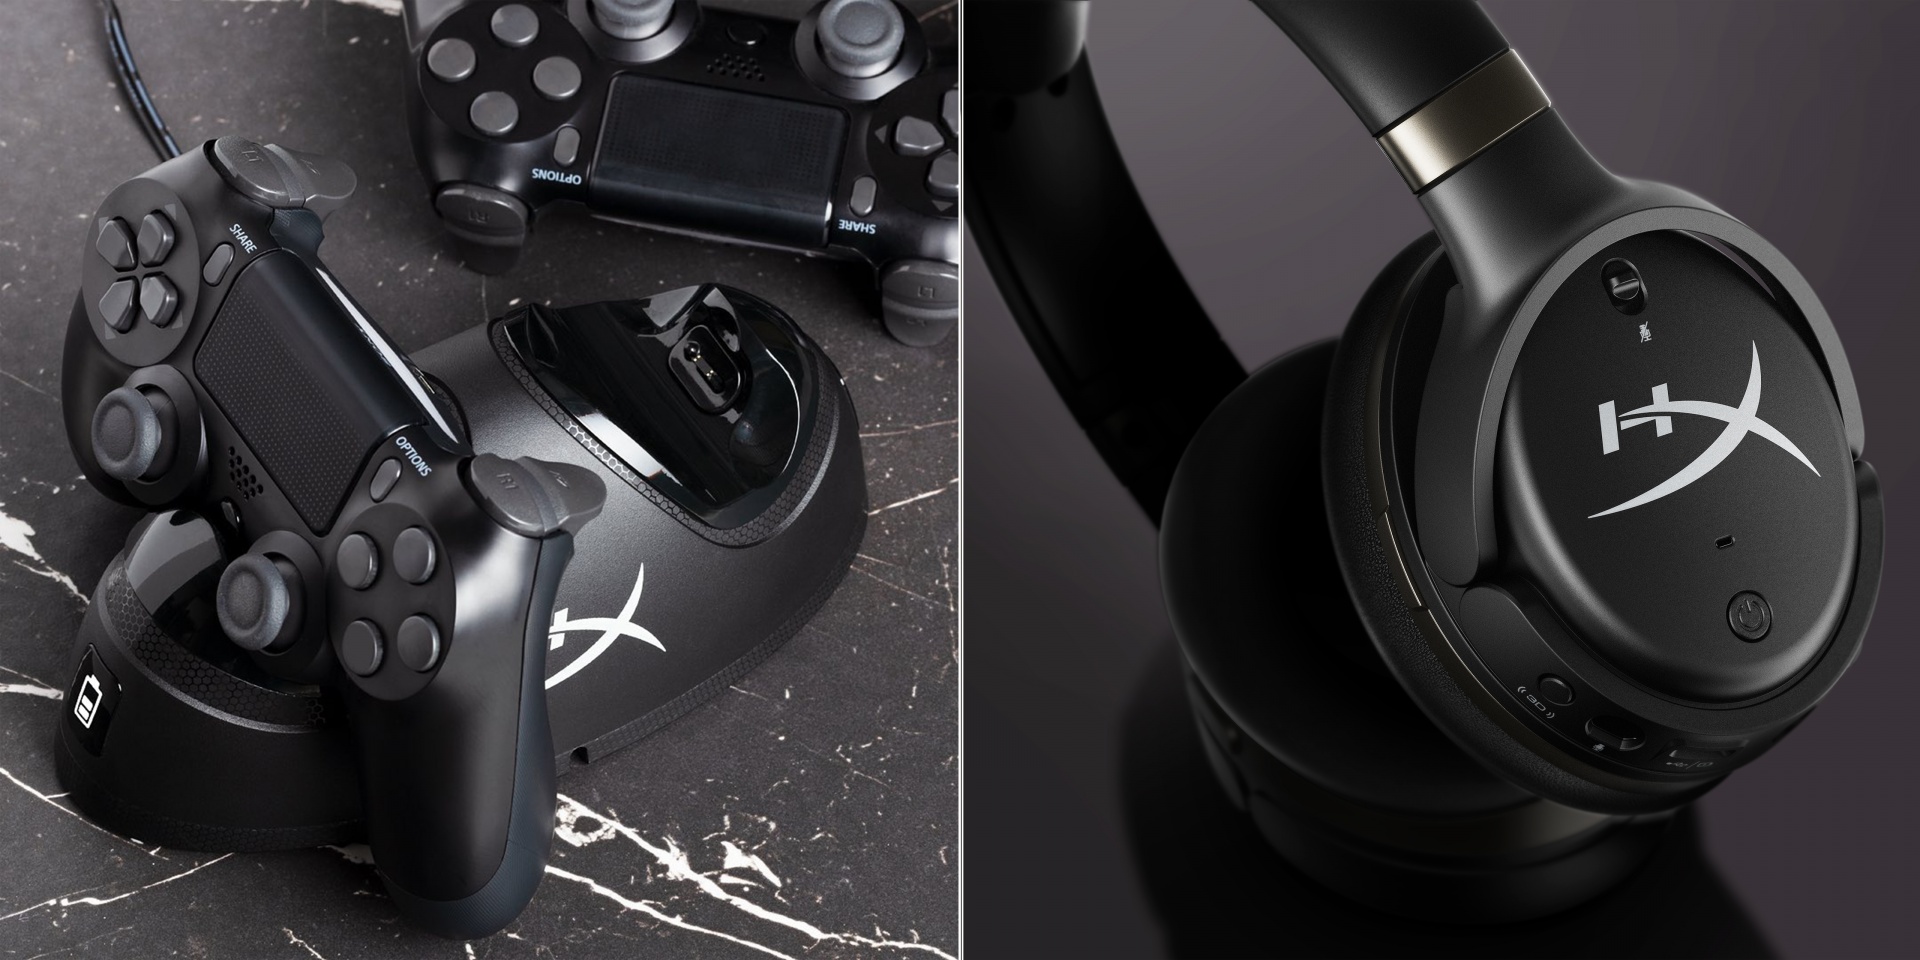 PS4 charger and headset design by Jimmy Huynh